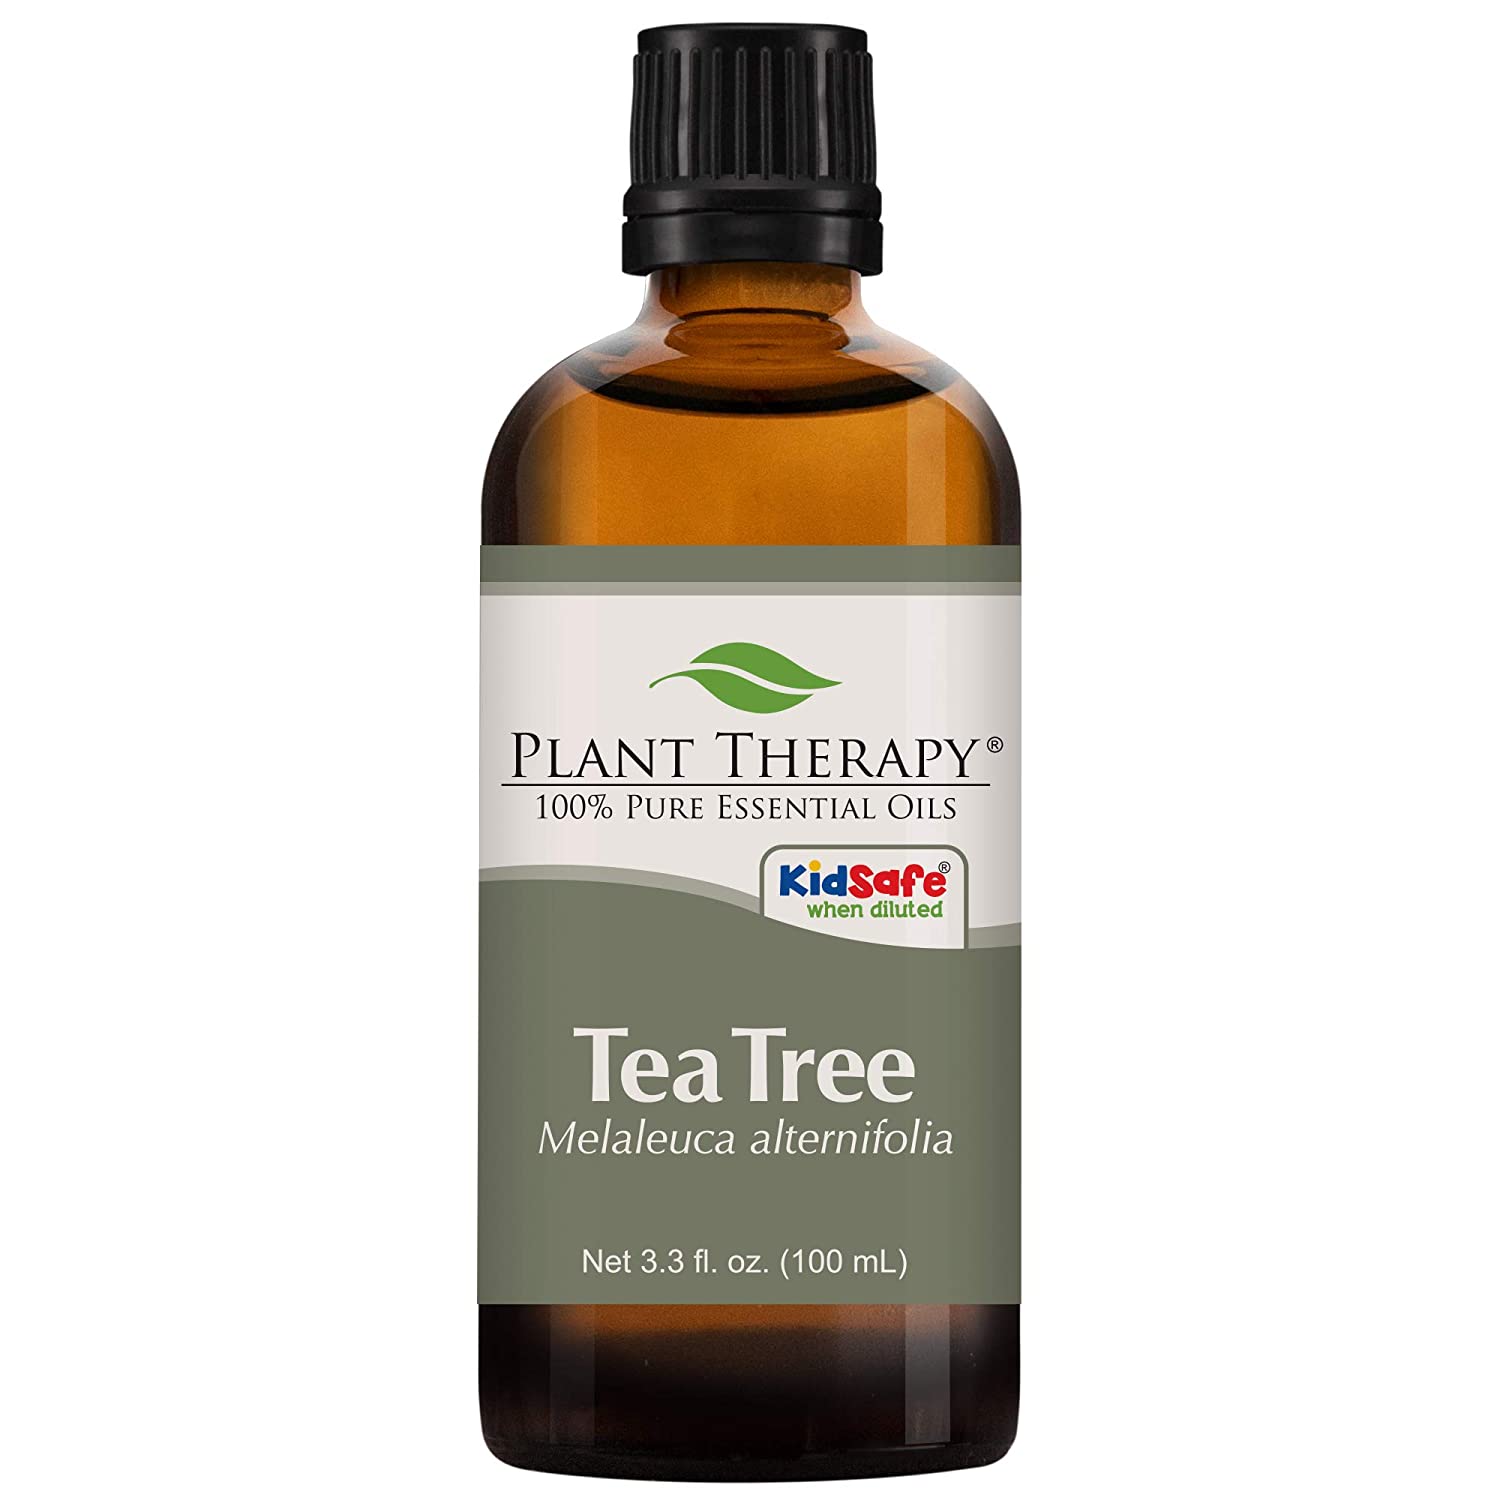 Plant Therapy Ear Ease KidSafe Essential Oil 10 oz